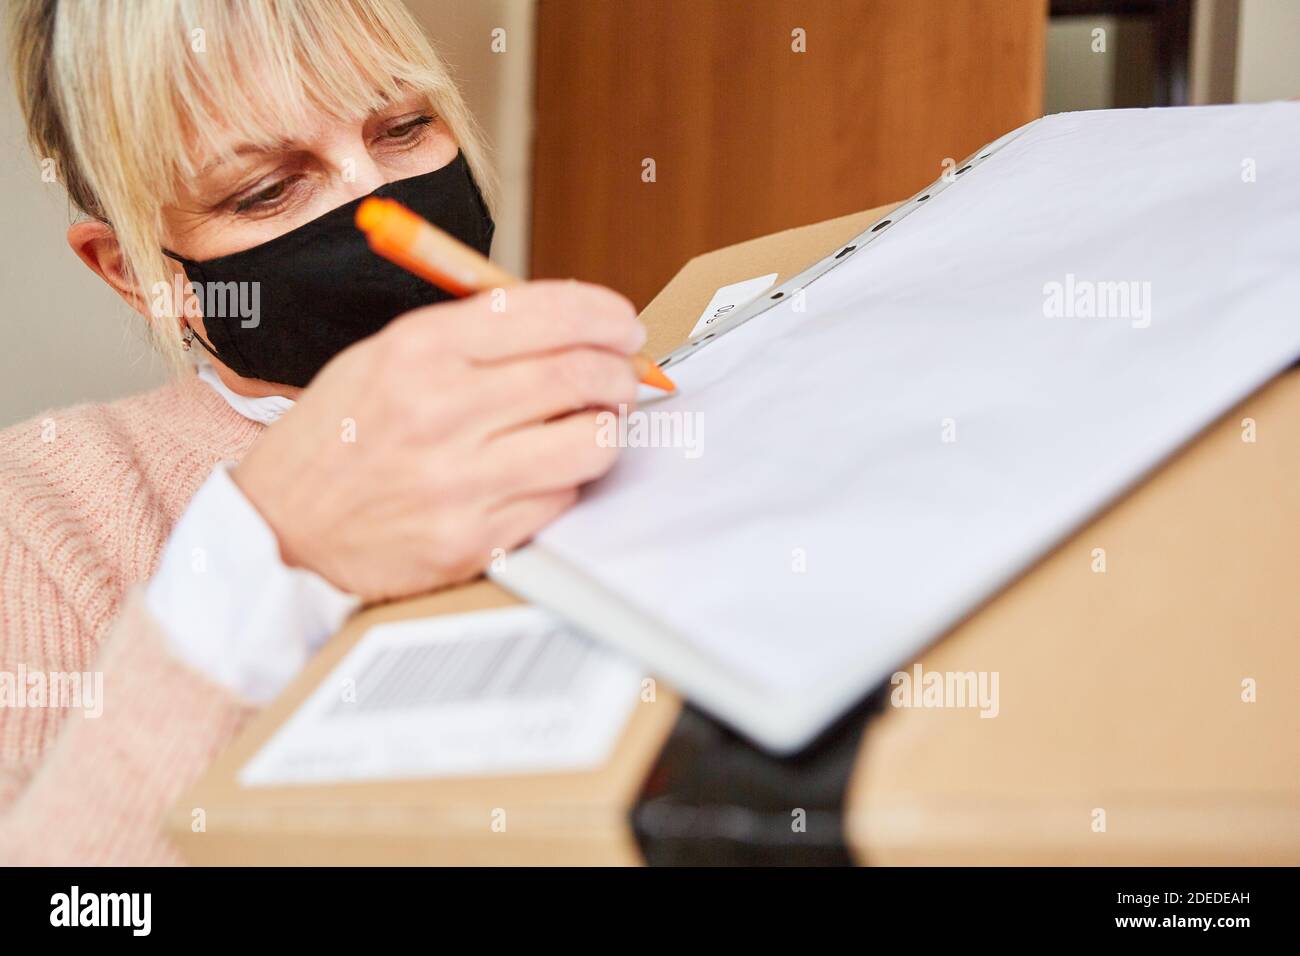 Woman with face mask in front of apartment door gives delivery service a signature for package Stock Photo